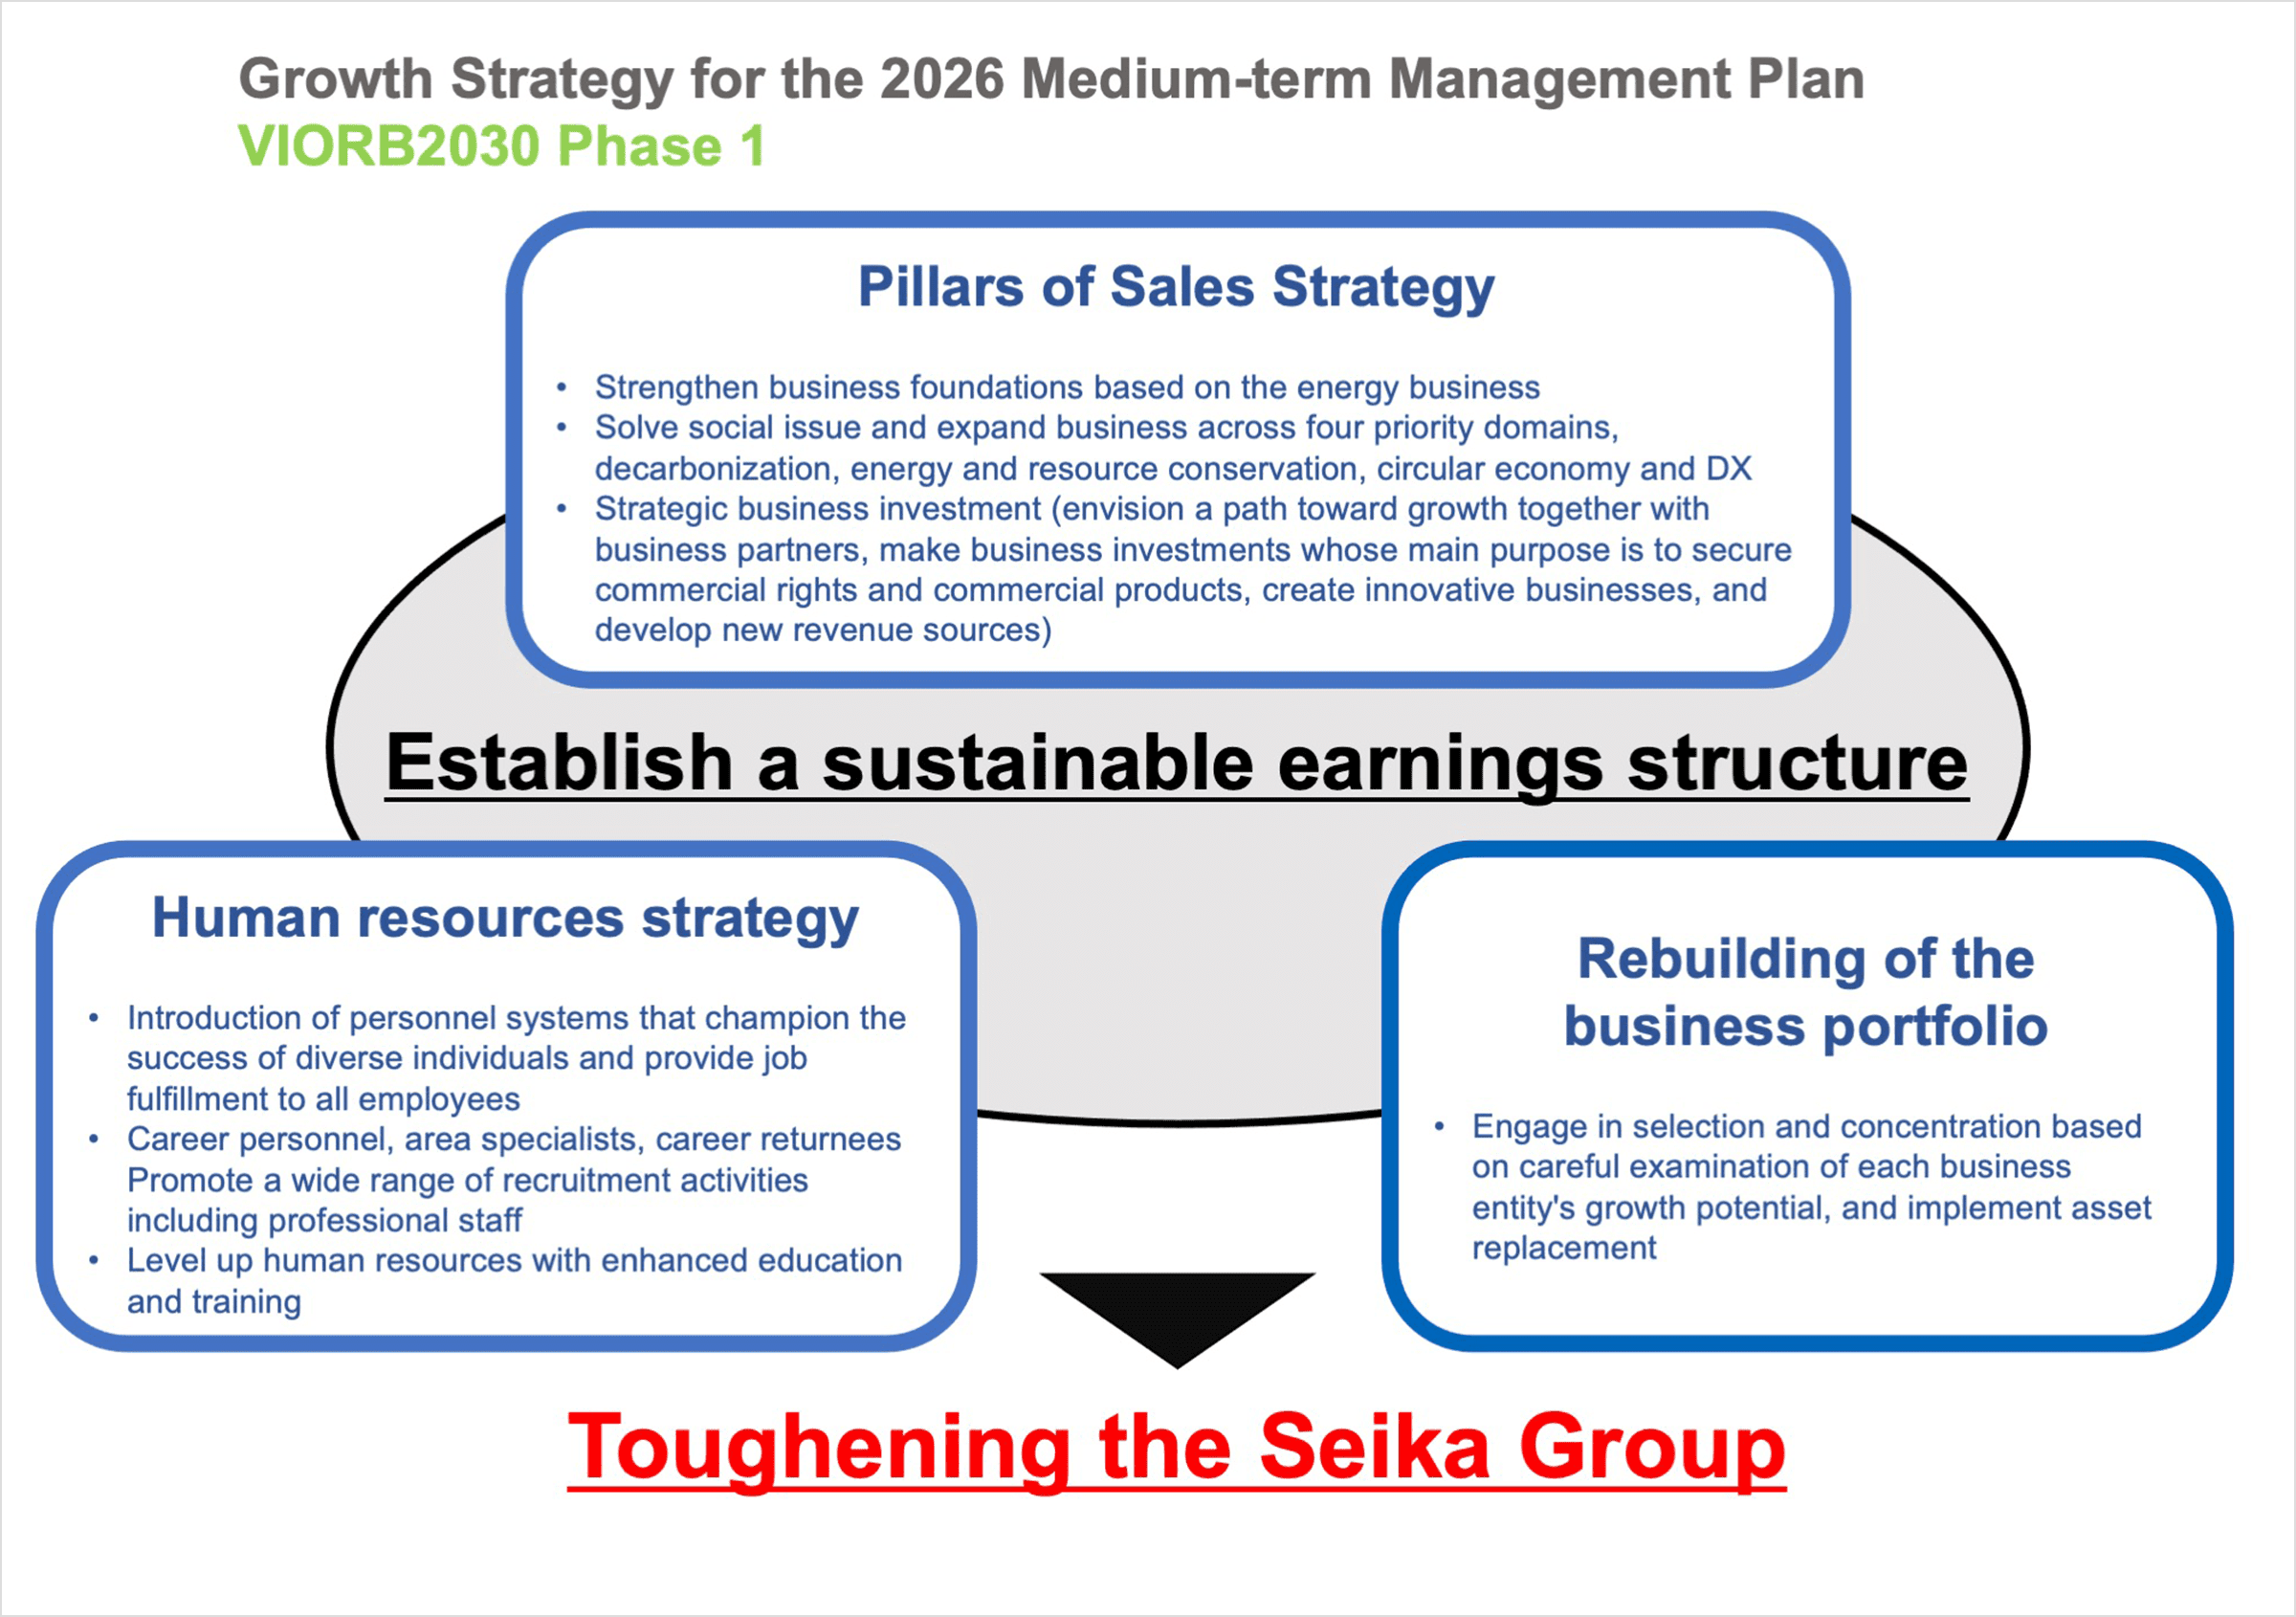 Growth Strategy for the 2026 Medium-term Management Plan VIORB2030 Phase1